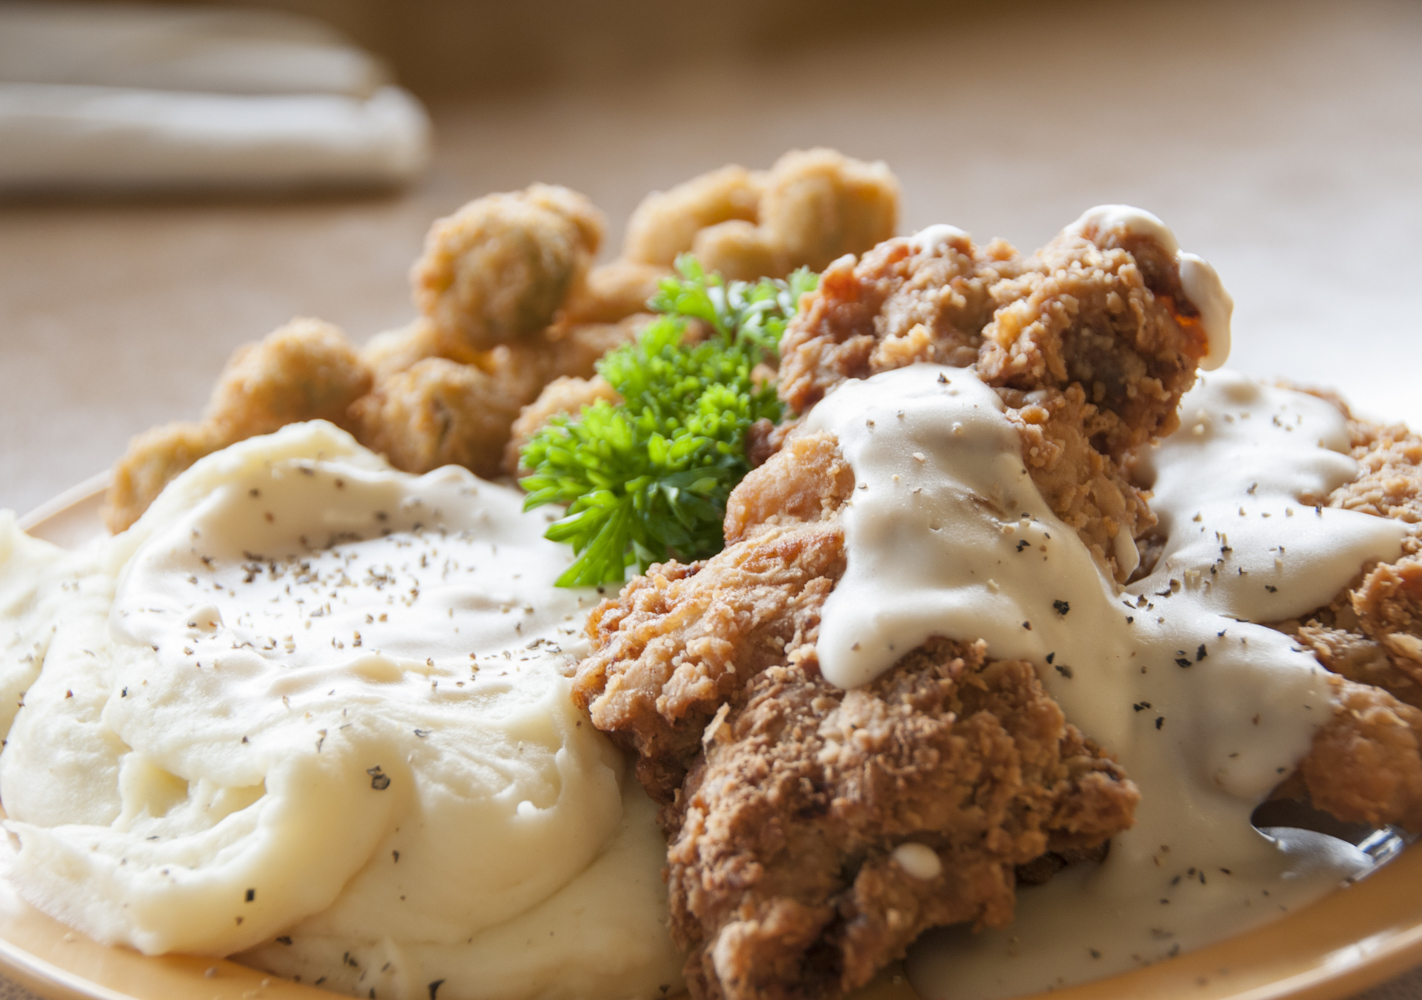 Southern comfort food at its best - mashed potatoes with country fried chicken and gravy on top.